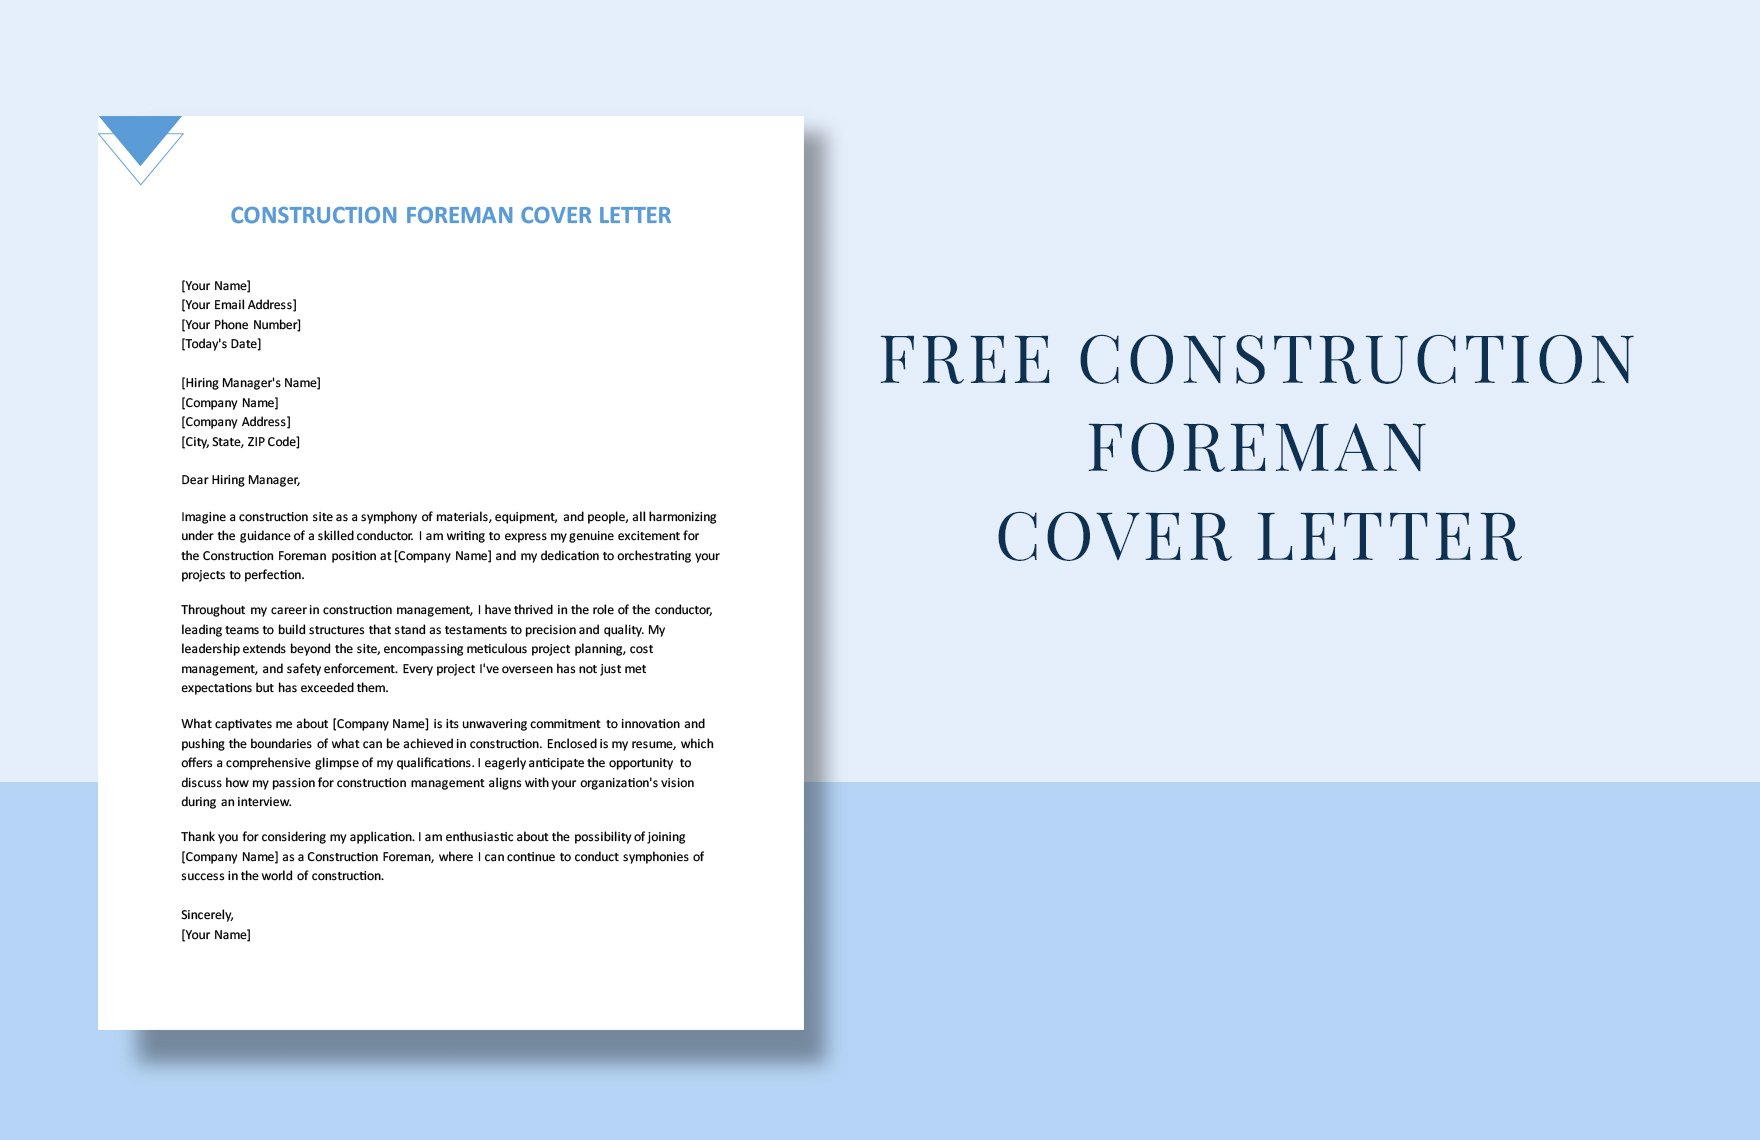 Construction Foreman Cover Letter in Word, Google Docs, PDF